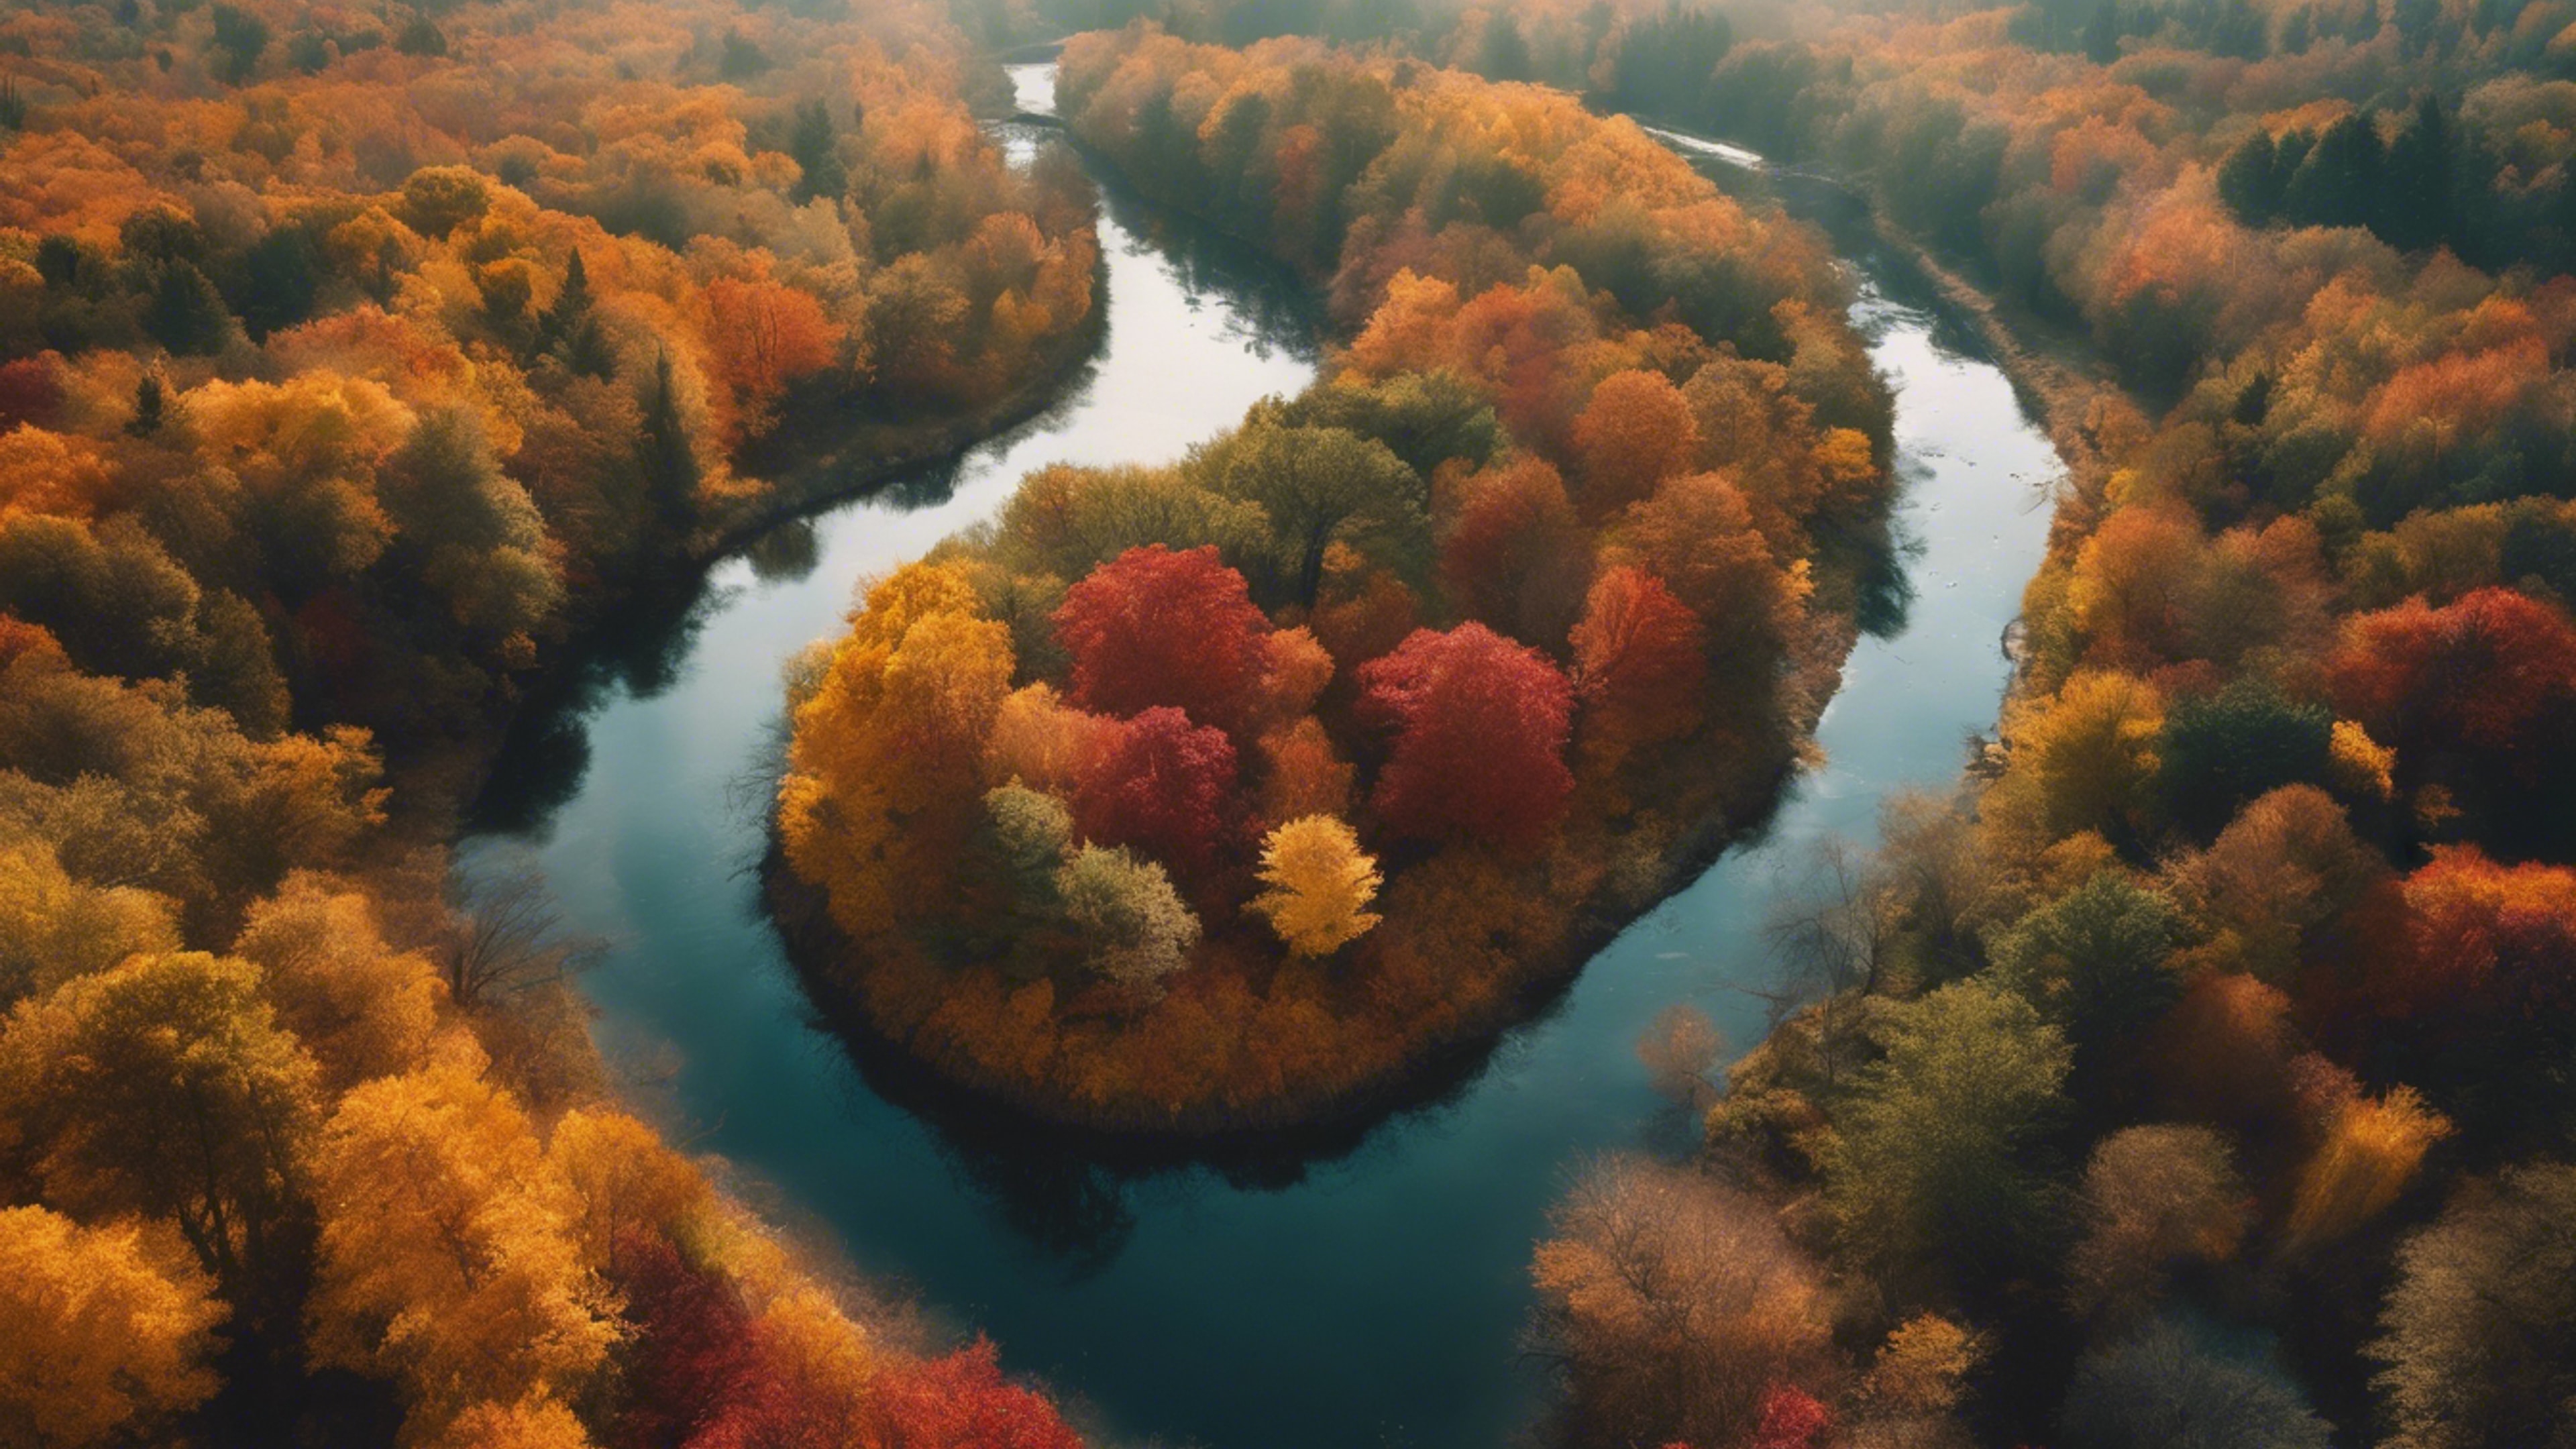 An overhead shot of a winding river, its banks adorned with trees showcasing an explosion of fall colors. Wallpaper[2a848fa5d1d344a79639]